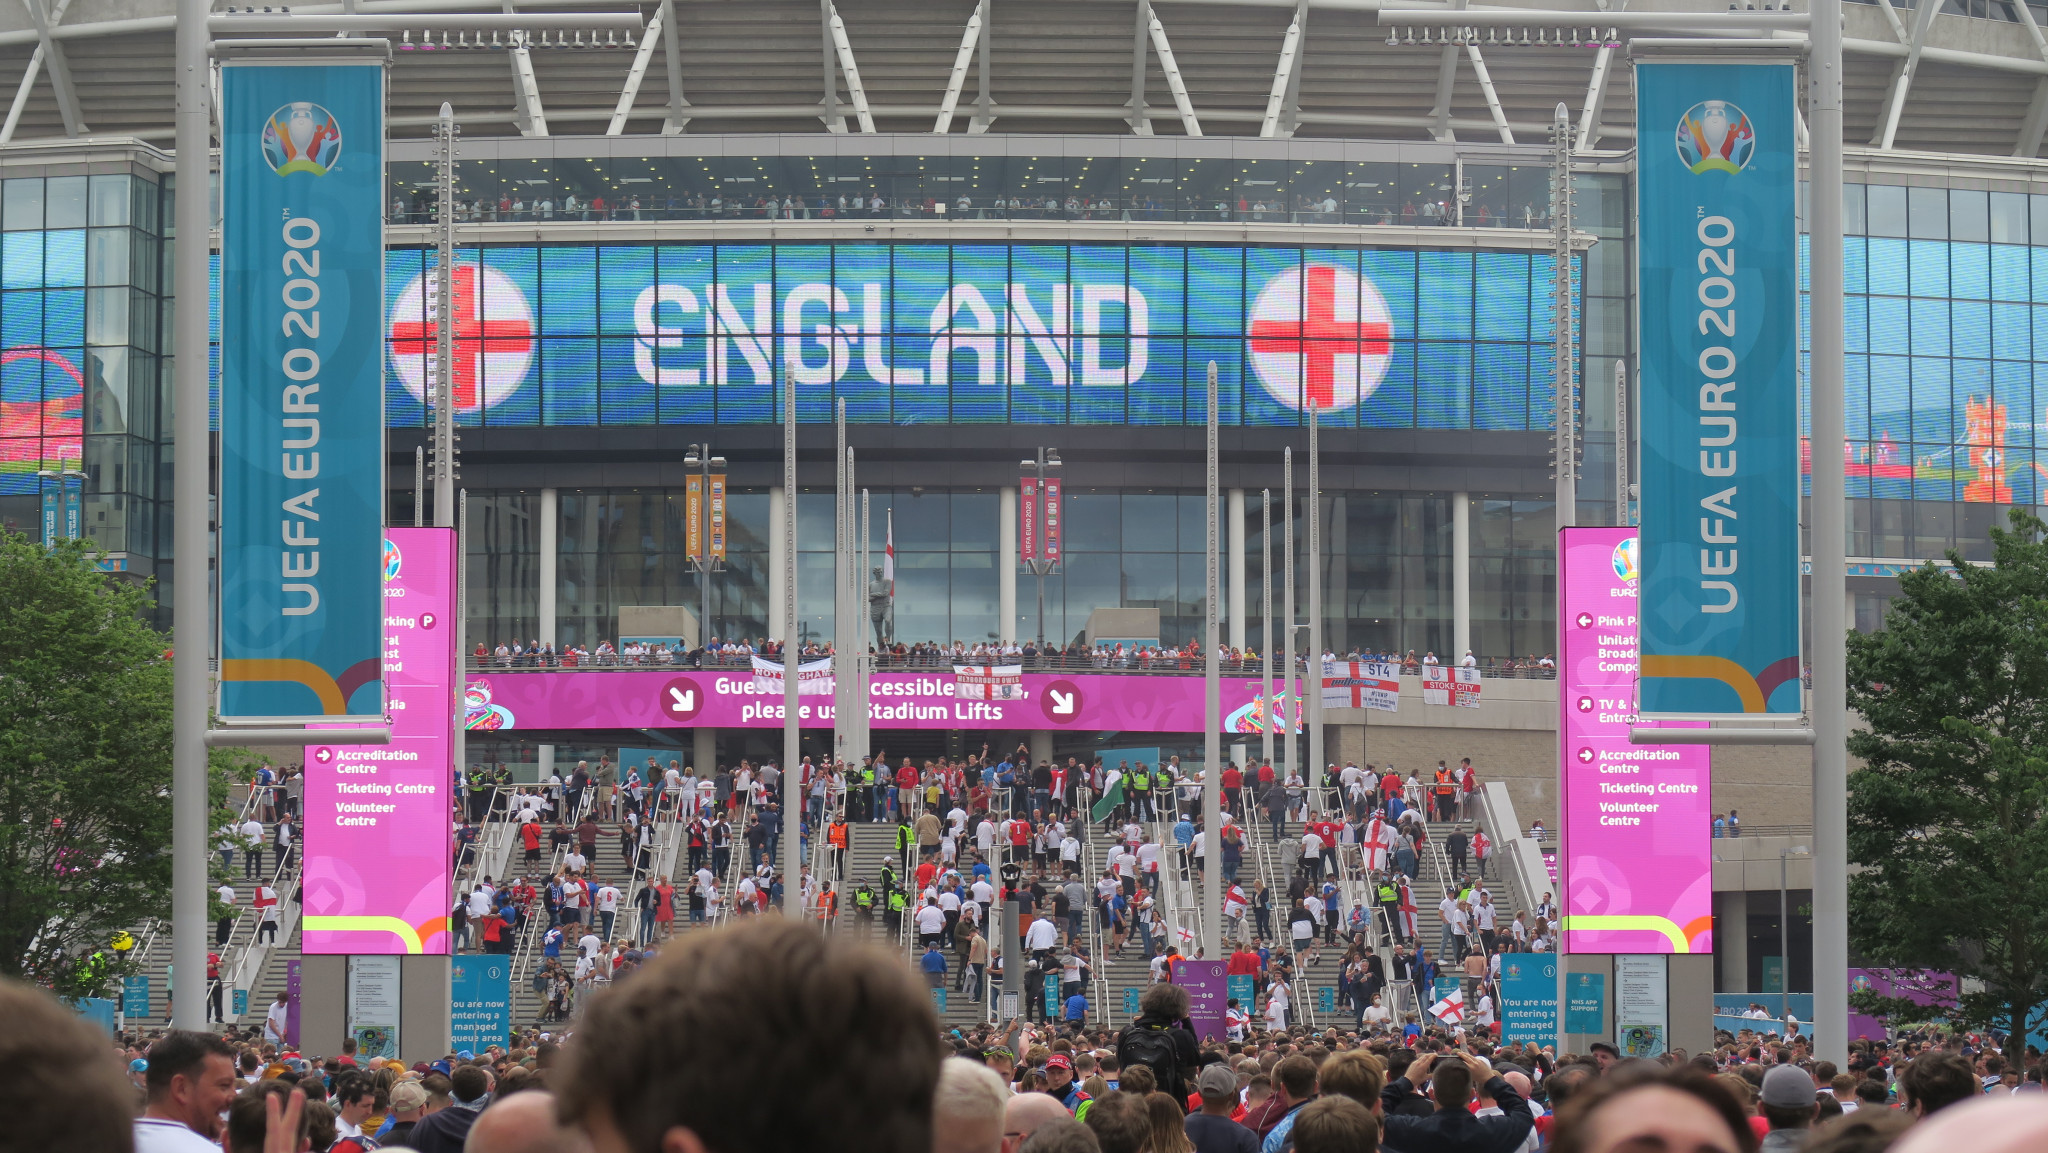 Wembley Stadium in London hosted the Euro 2020 final at the conclusion of a tournament held across the continent ©Getty Images